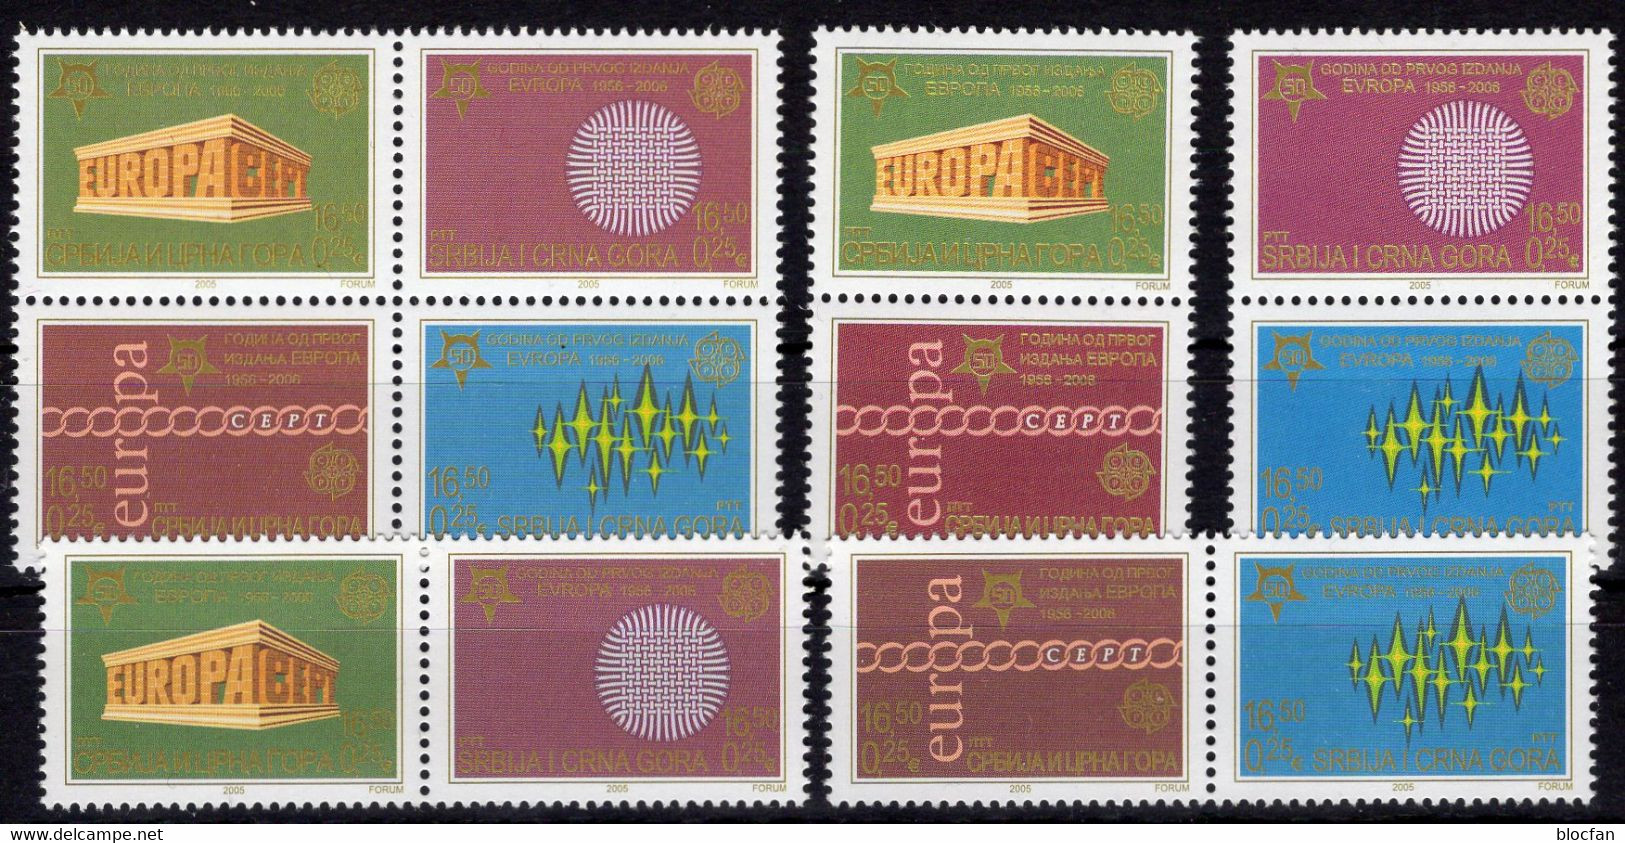 CEPT 2006 Serbia 4ZD+4-Block A ** 24€ Stamps On Stamp YU1361 1380 1417 1457 Bloc Hoja Bloque Ms Se-tenant Bf EUROPA - Collections, Lots & Séries